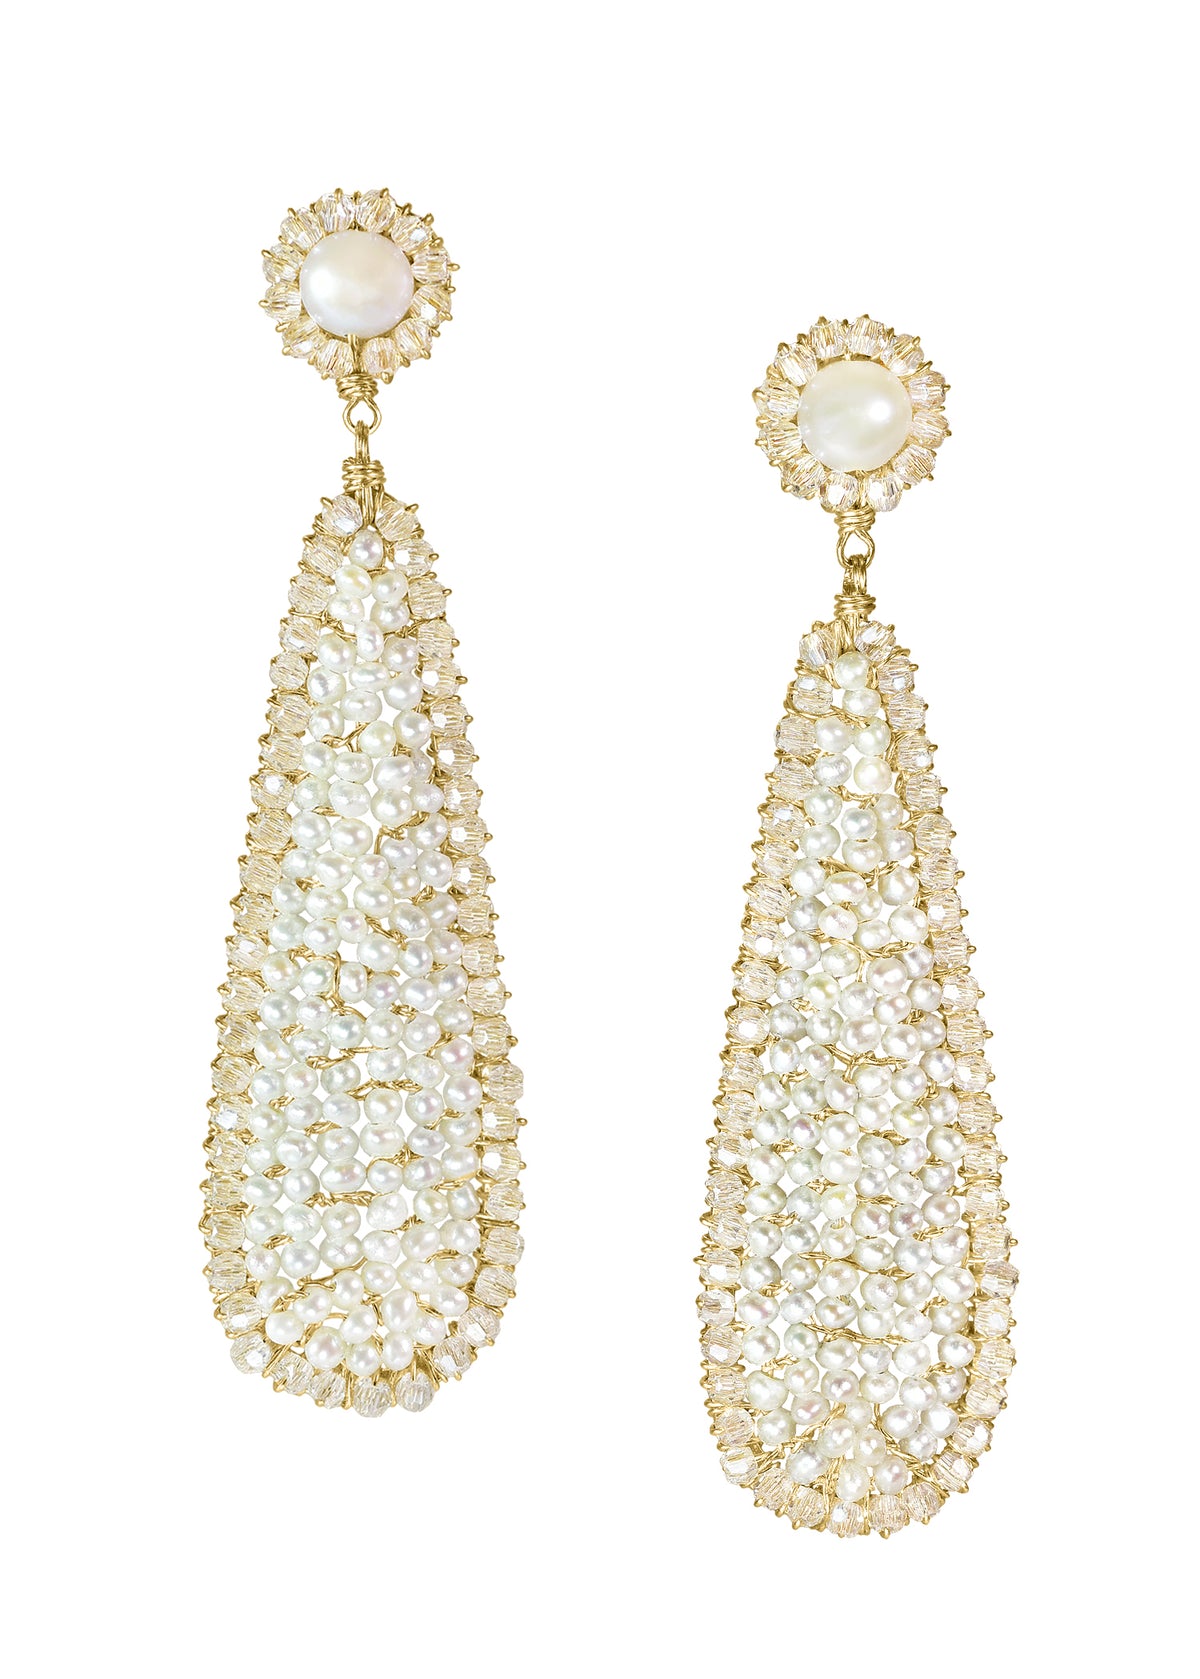 Crystal Freshwater pearl 14k gold fill Earrings measure 2&quot; in length (including the posts) and 1/2&quot; in width at the widest point. Post measures 3/8&quot; in diameter Handmade in our Los Angeles studio